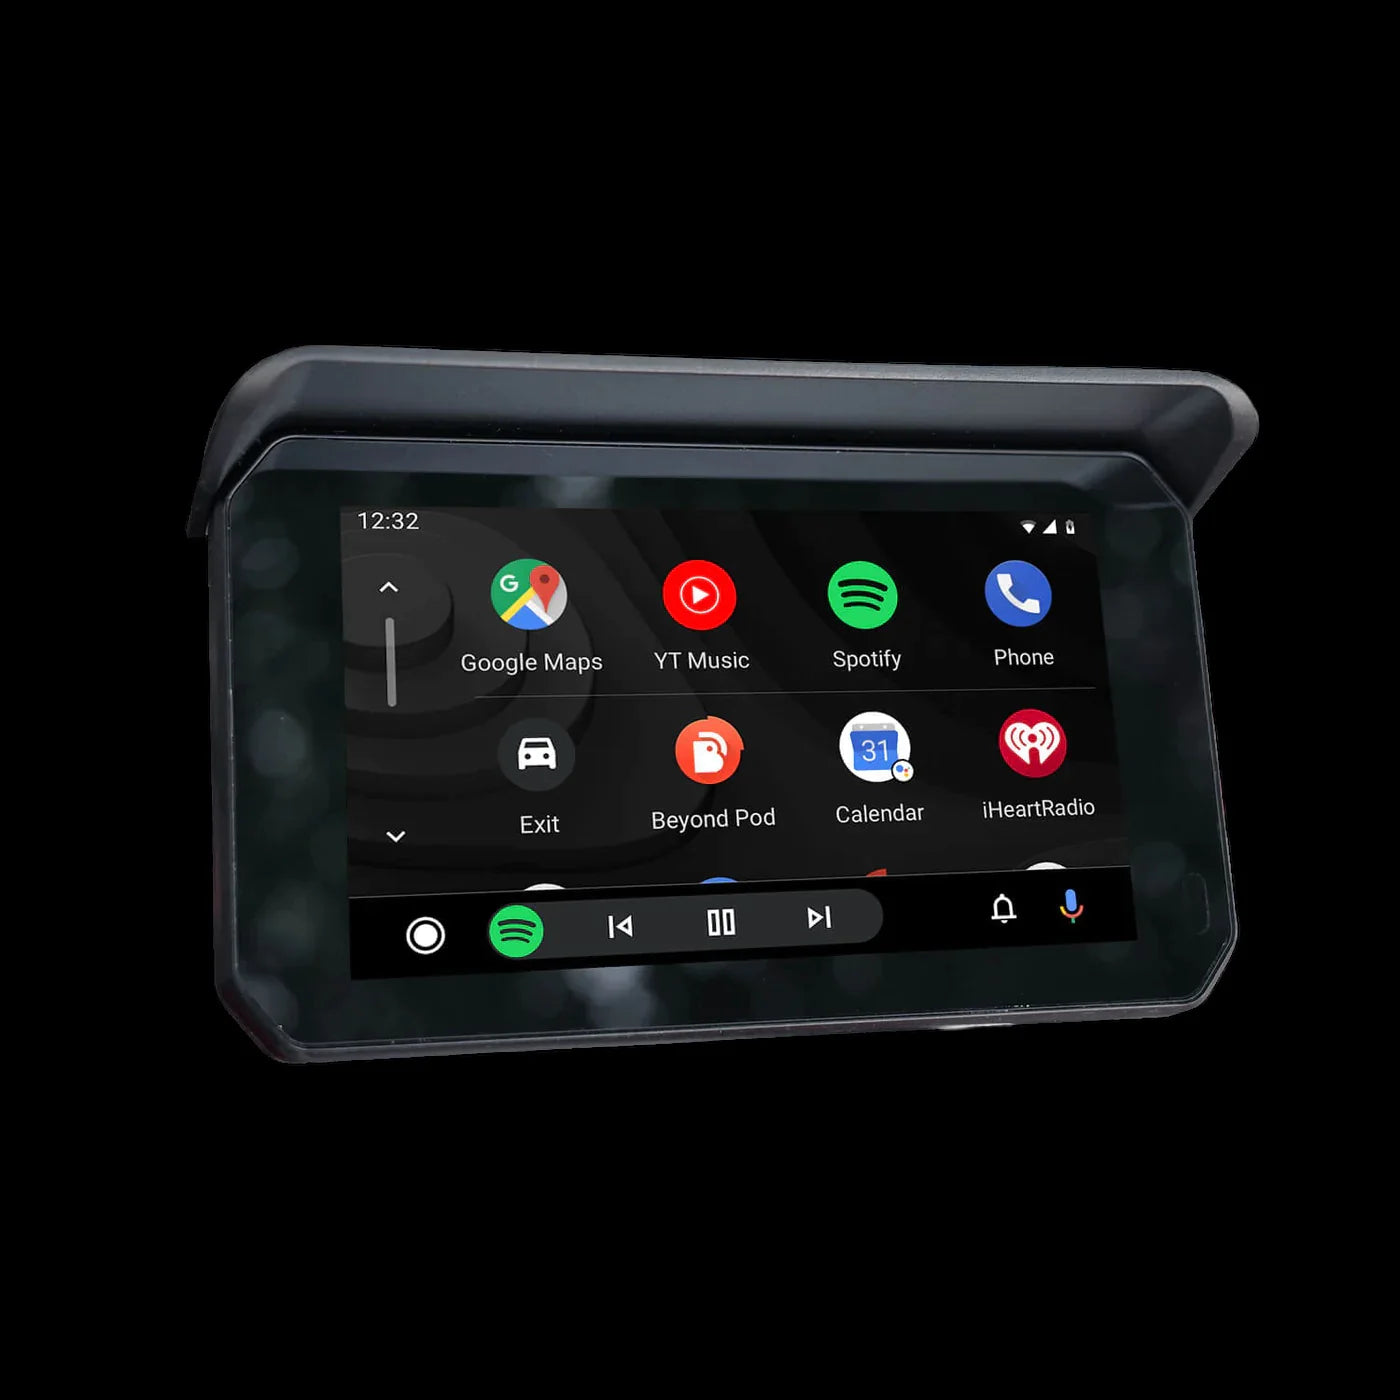 GG Lighting Trailvue Front and Rear Camera System with Carplay